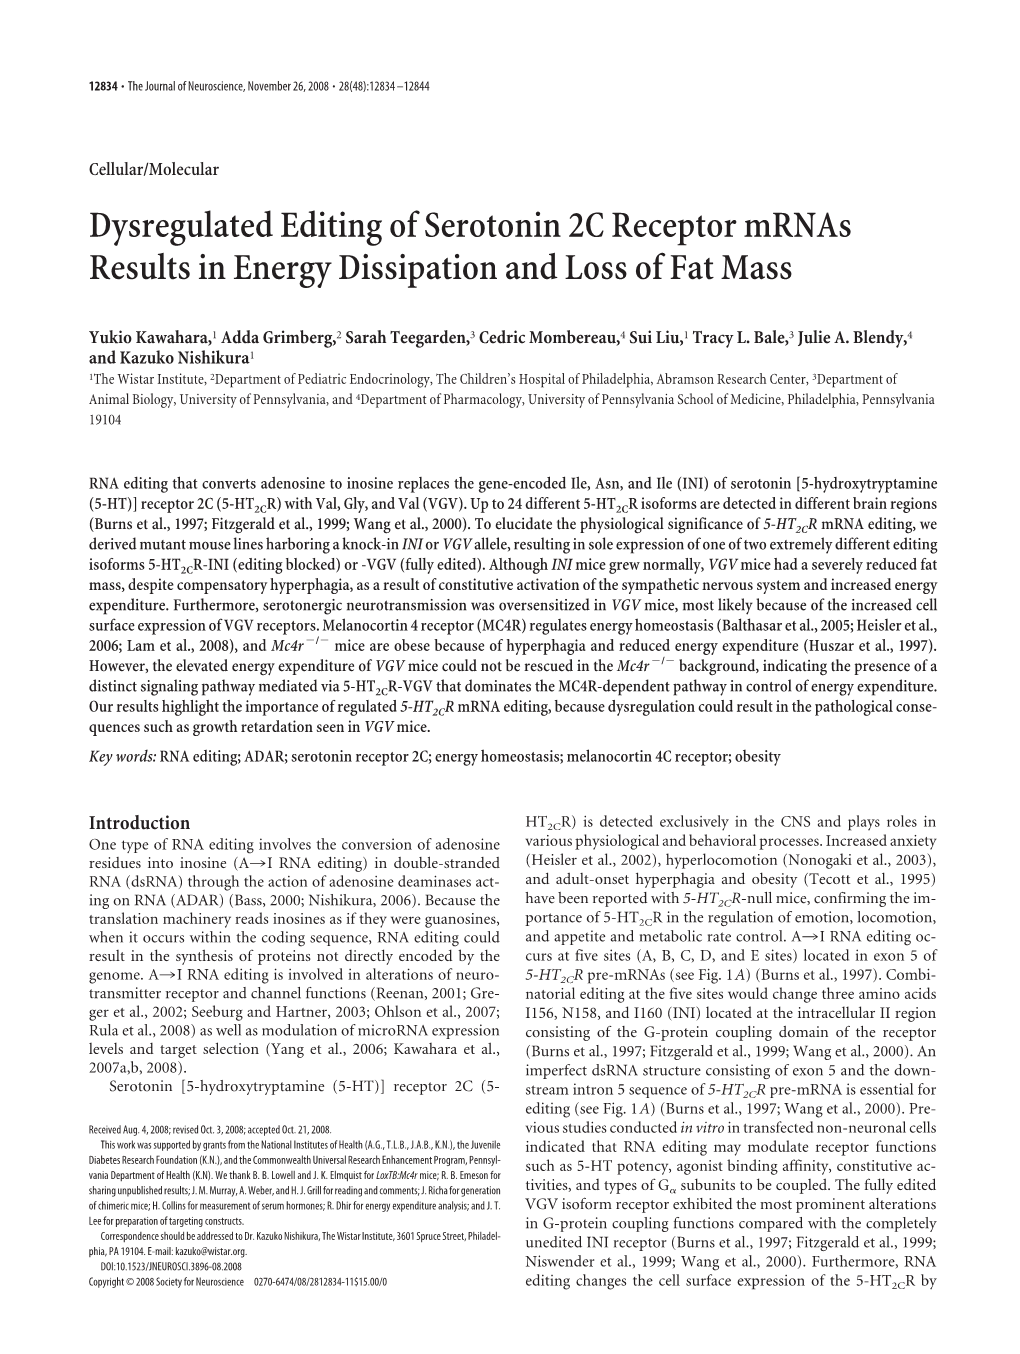 Dysregulated Editing of Serotonin 2C Receptor Mrnas Results in Energy Dissipation and Loss of Fat Mass